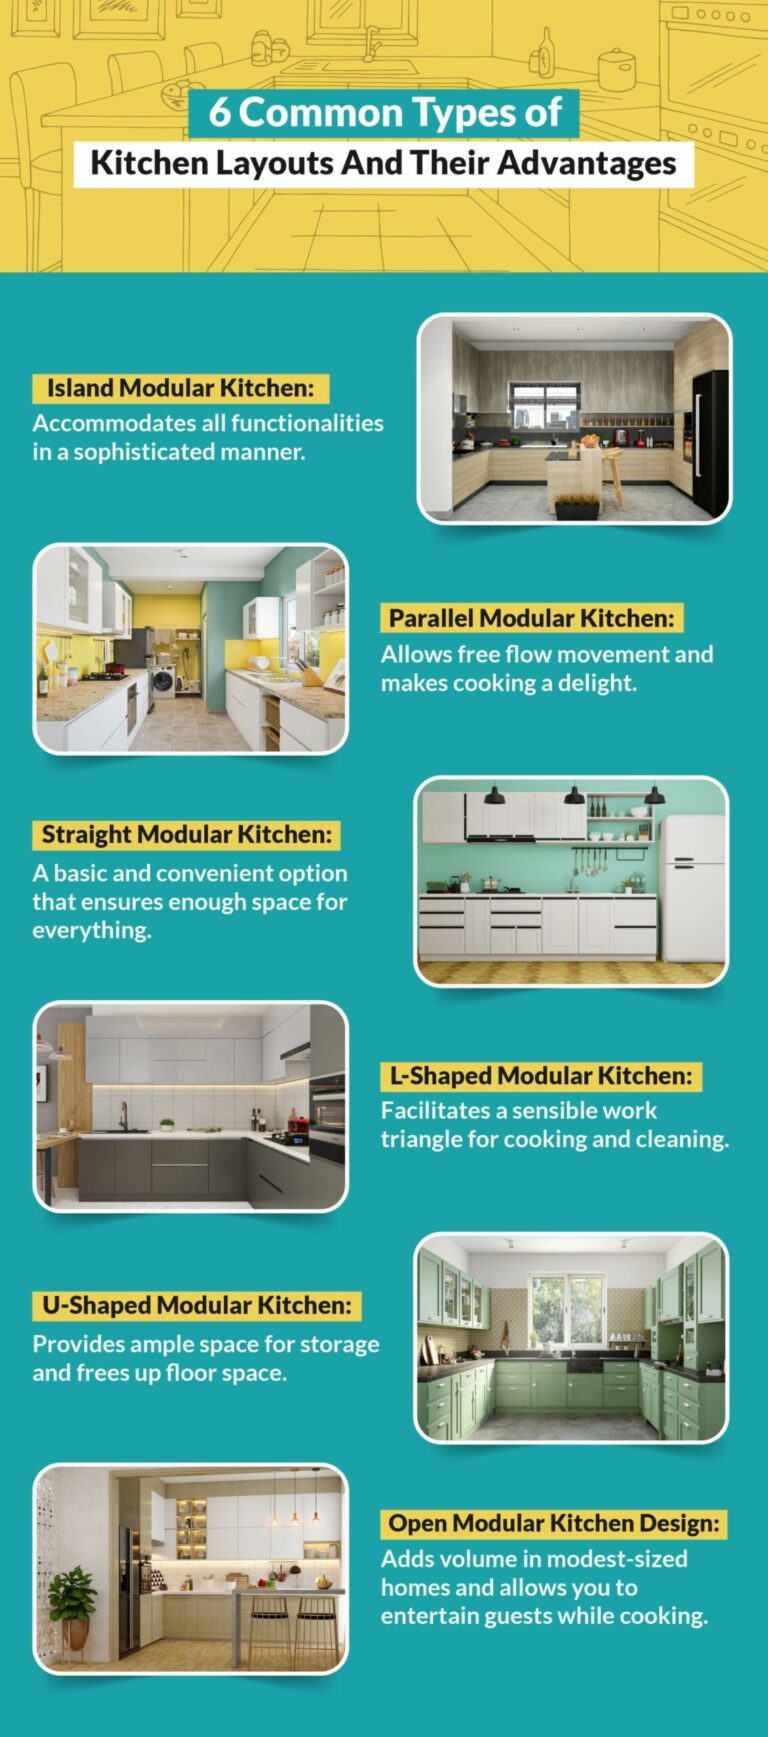 What Are The Six 6 Basic Kitchen Designs?